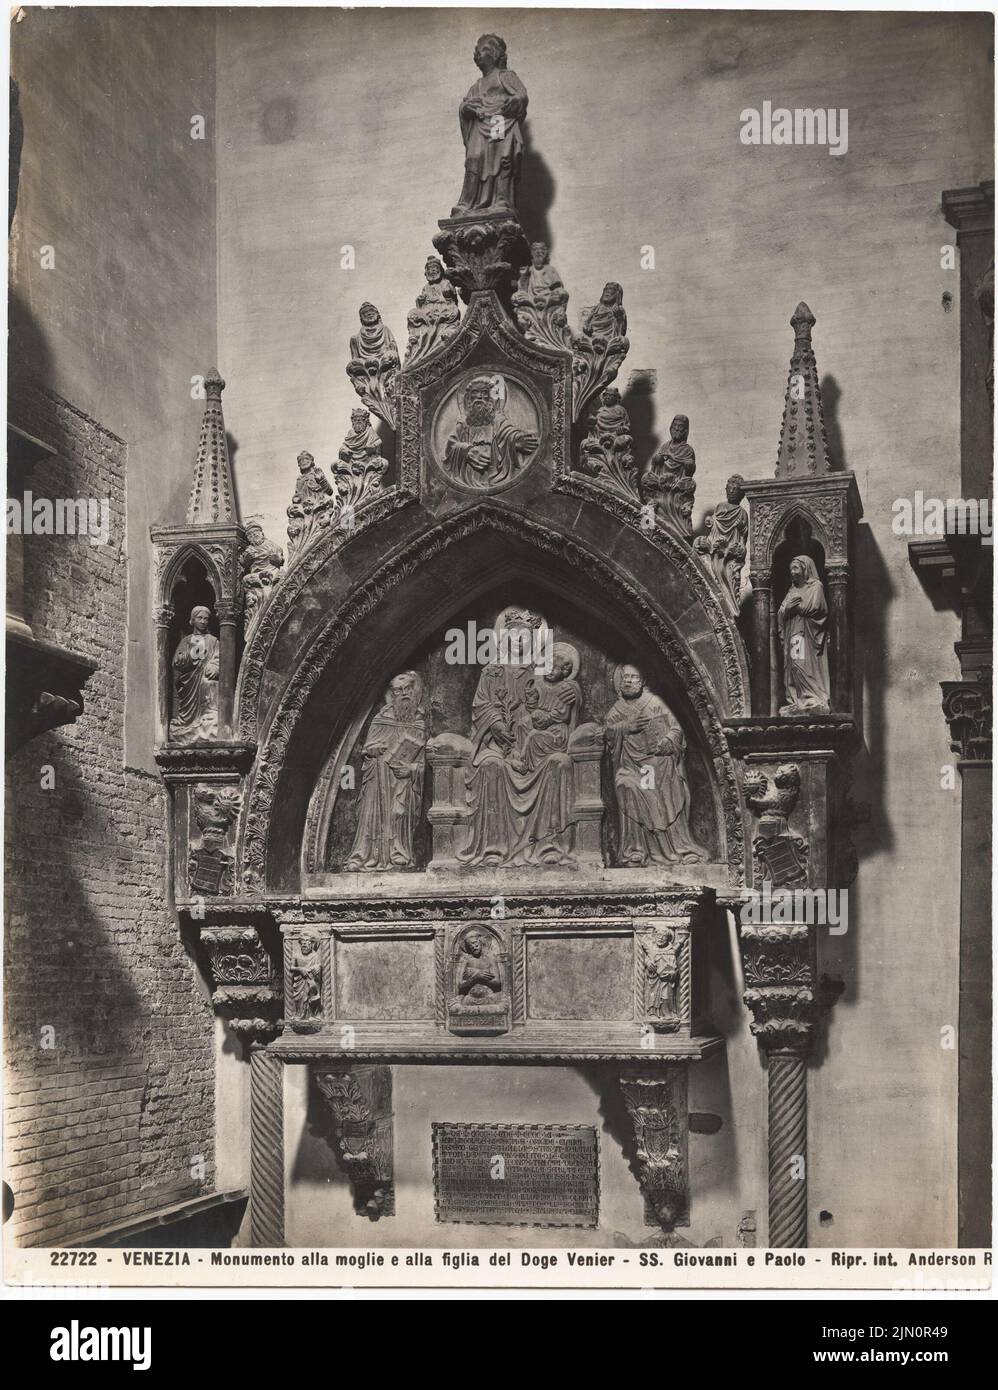 Anderson (1813-1877), SS. Giovanni e Paolo, Venice. Tomb for wife and daughter of the Dogen Venier (without dat.): View of the monument. Photo, 26.6 x 20.4 cm (including scan edges) Anderson  (1813-1877): SS. Giovanni e Paolo, Venedig. Grabmal für Ehefrau und Tochter des Dogen Venier (ohne Dat.) Stock Photo